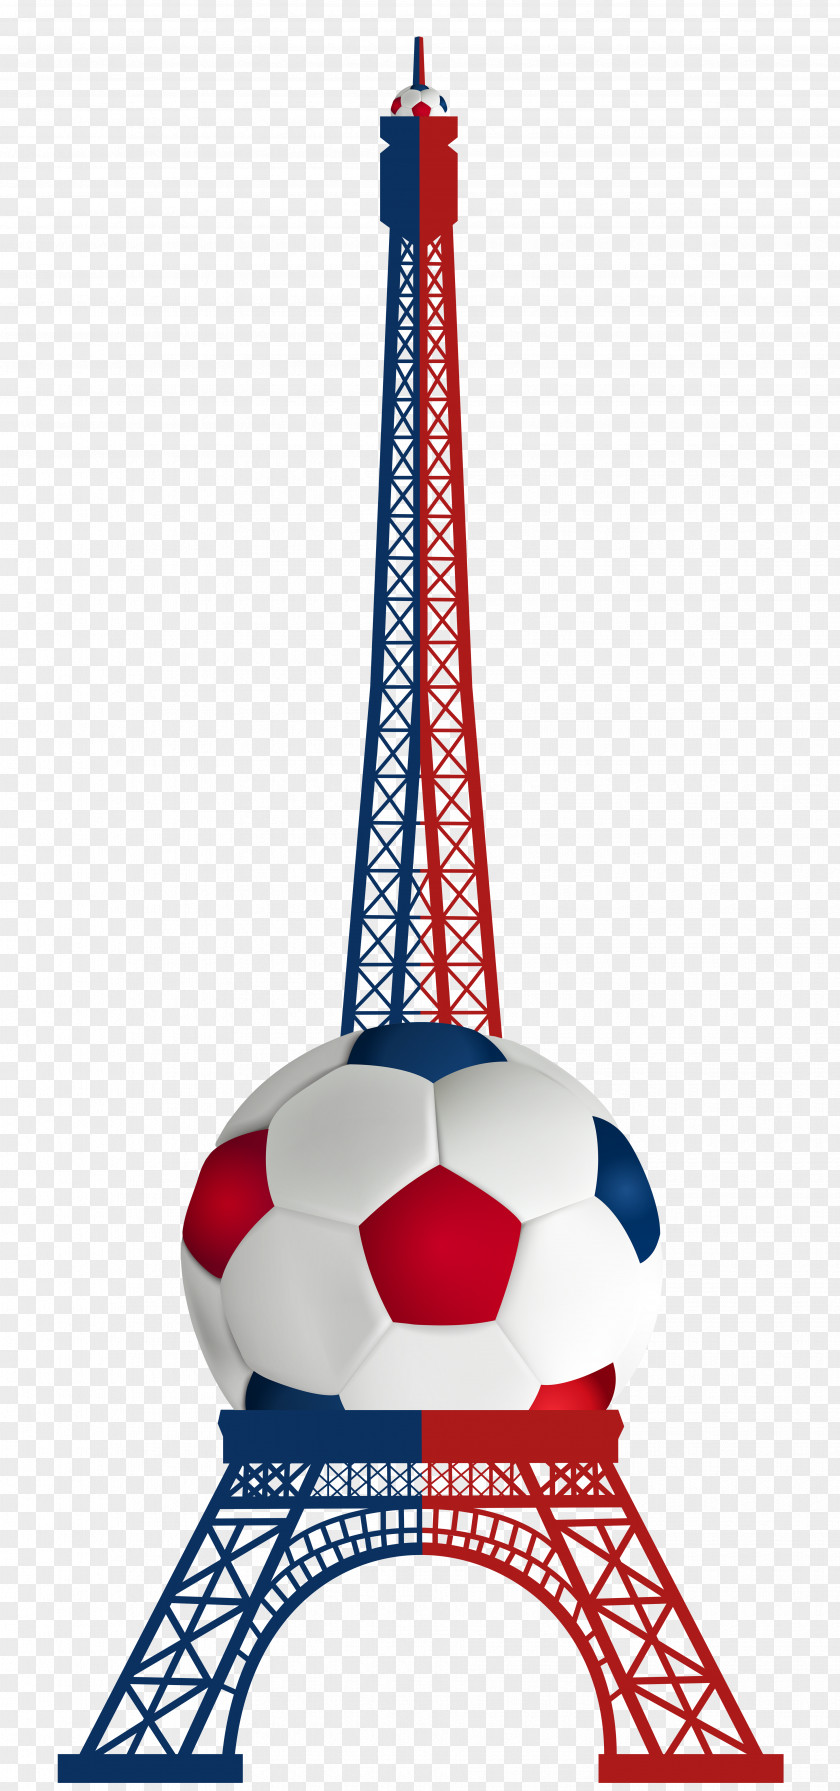 Eiffel Tower Euro 2016 France Transparent Clip Art Image Drawing Sketch PNG